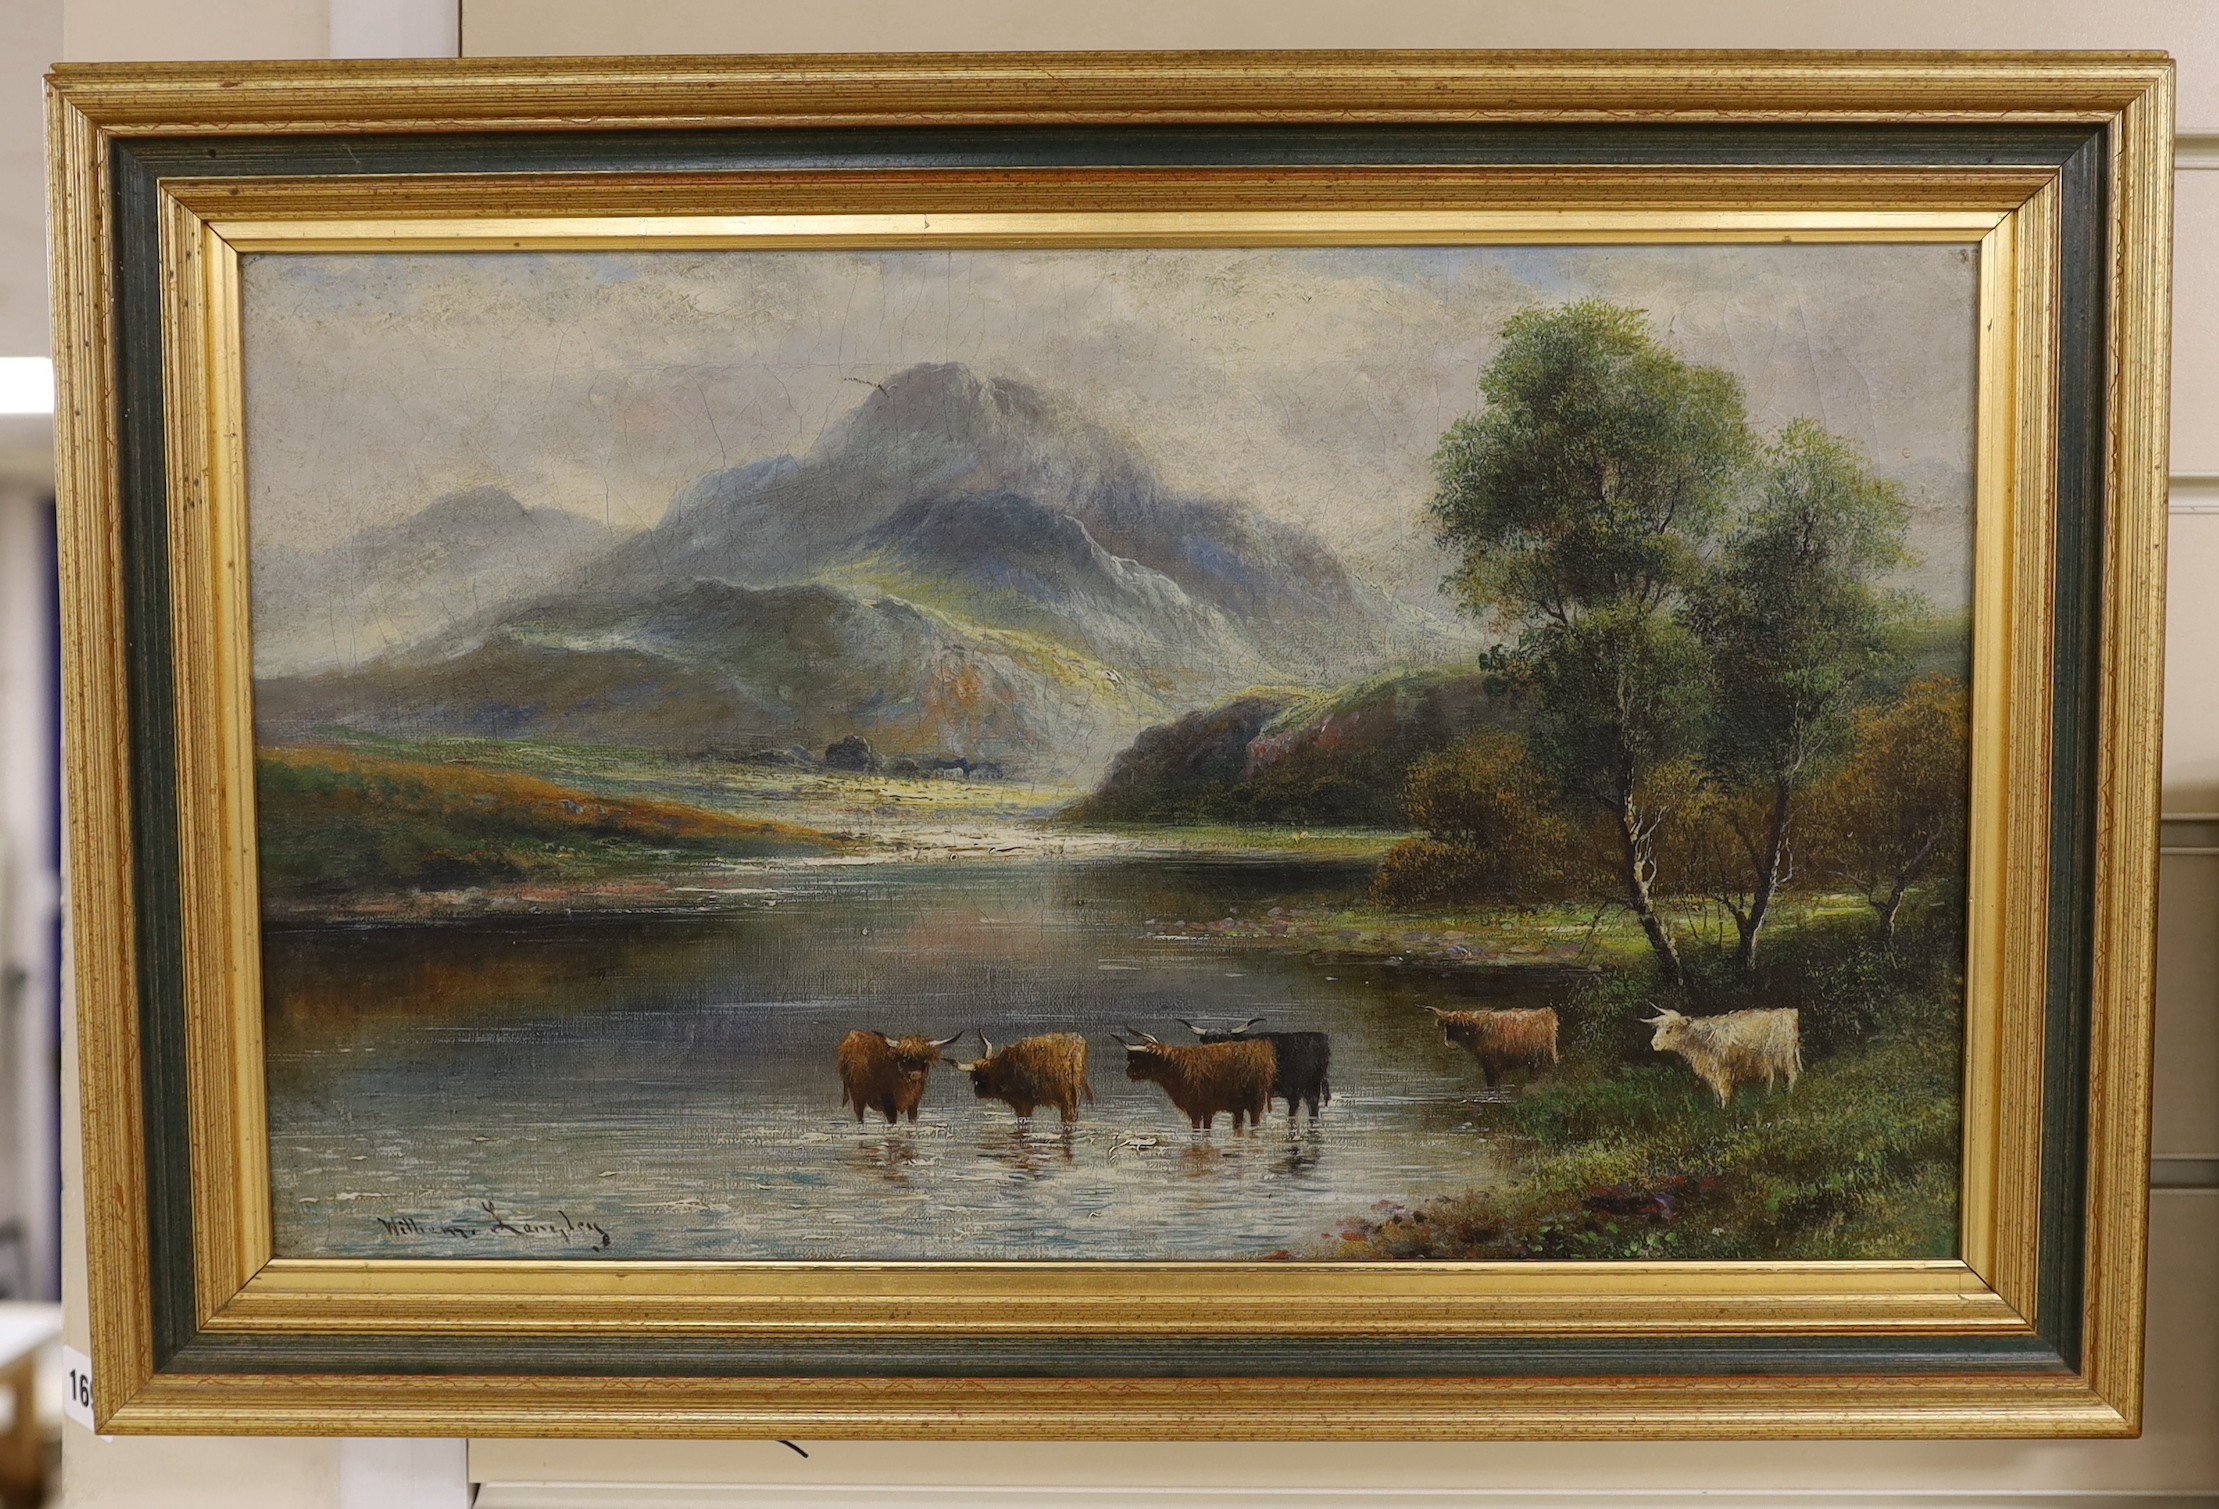 William Langley (1880-1920), oil on canvas, Lock Delaney, signed, 29 x 49cm